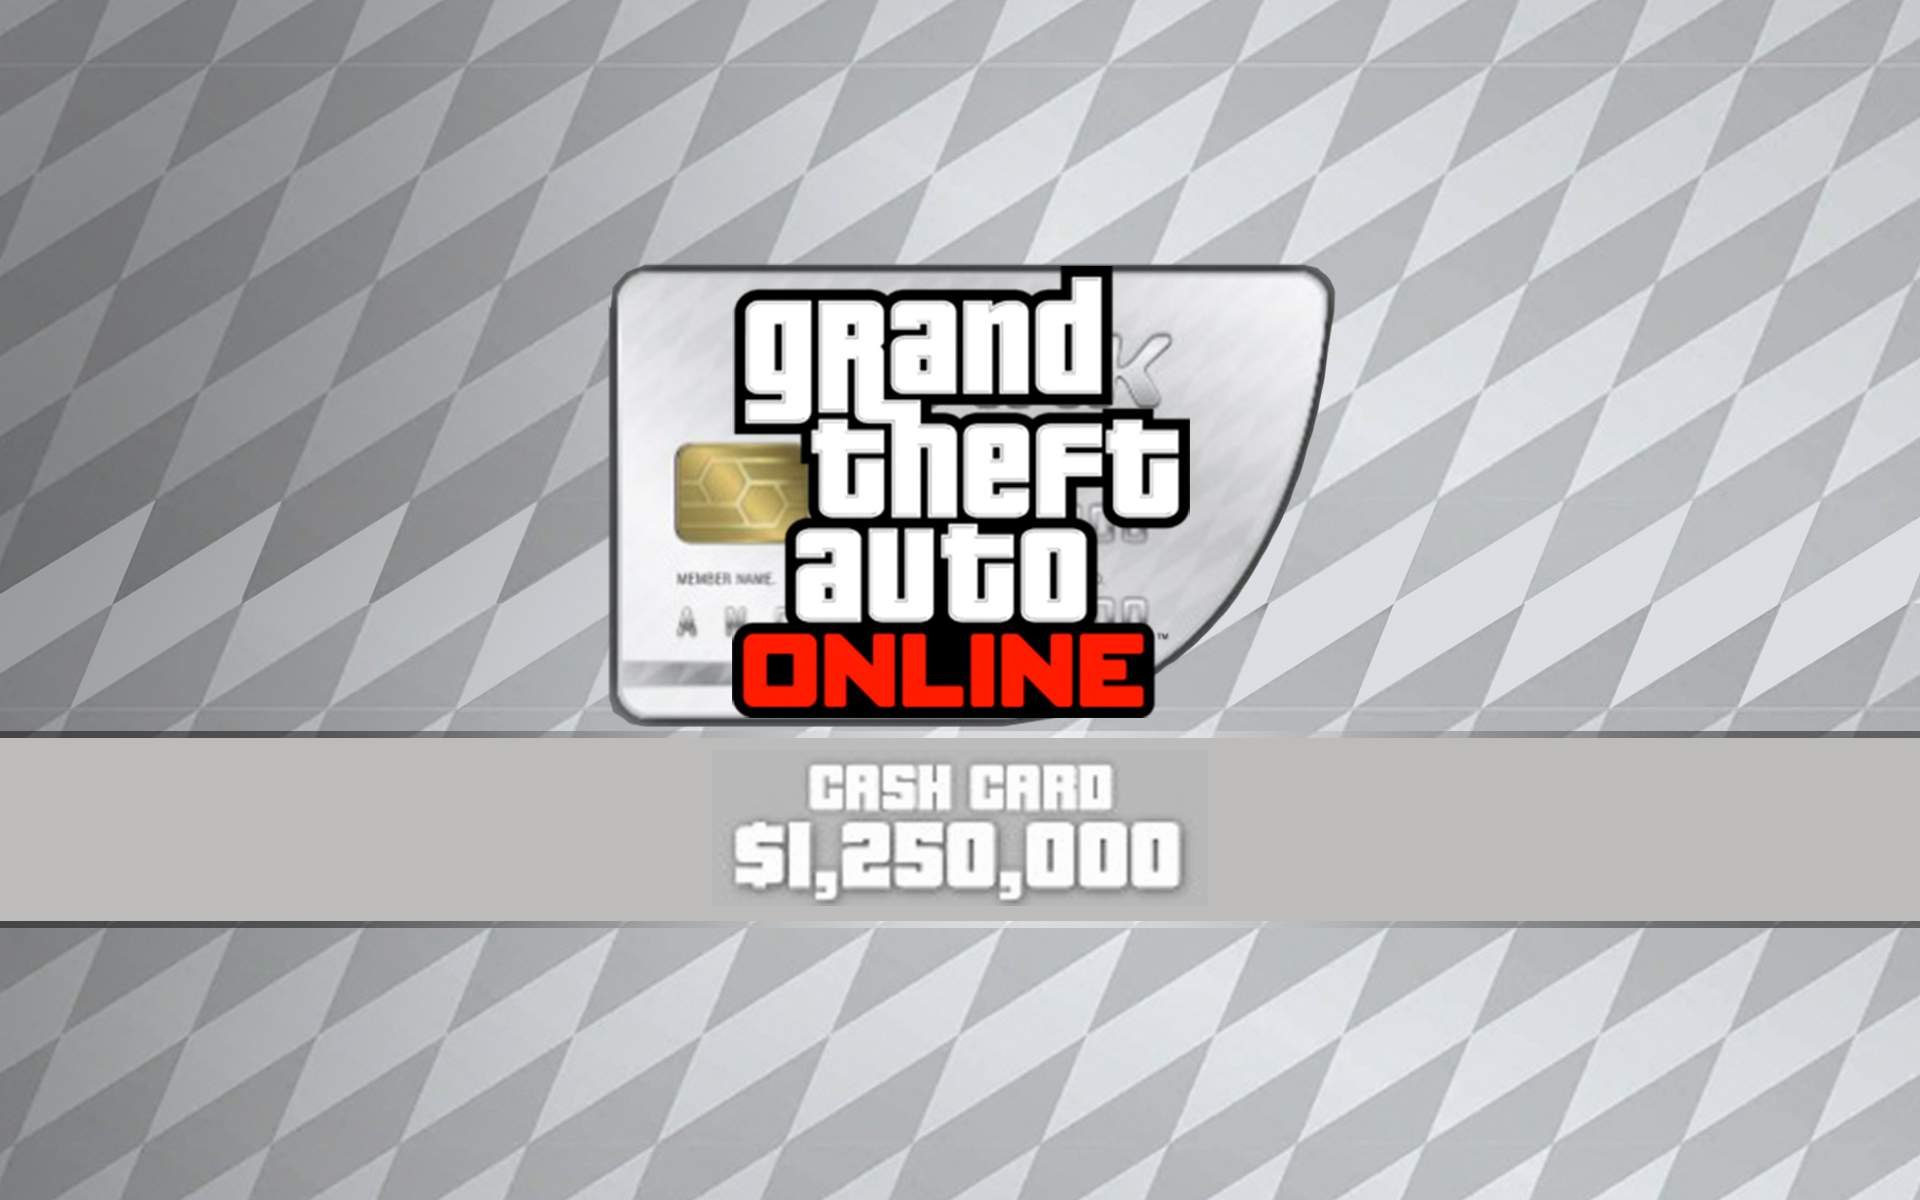 Grand Theft Auto Online Great White Shark Cash Card